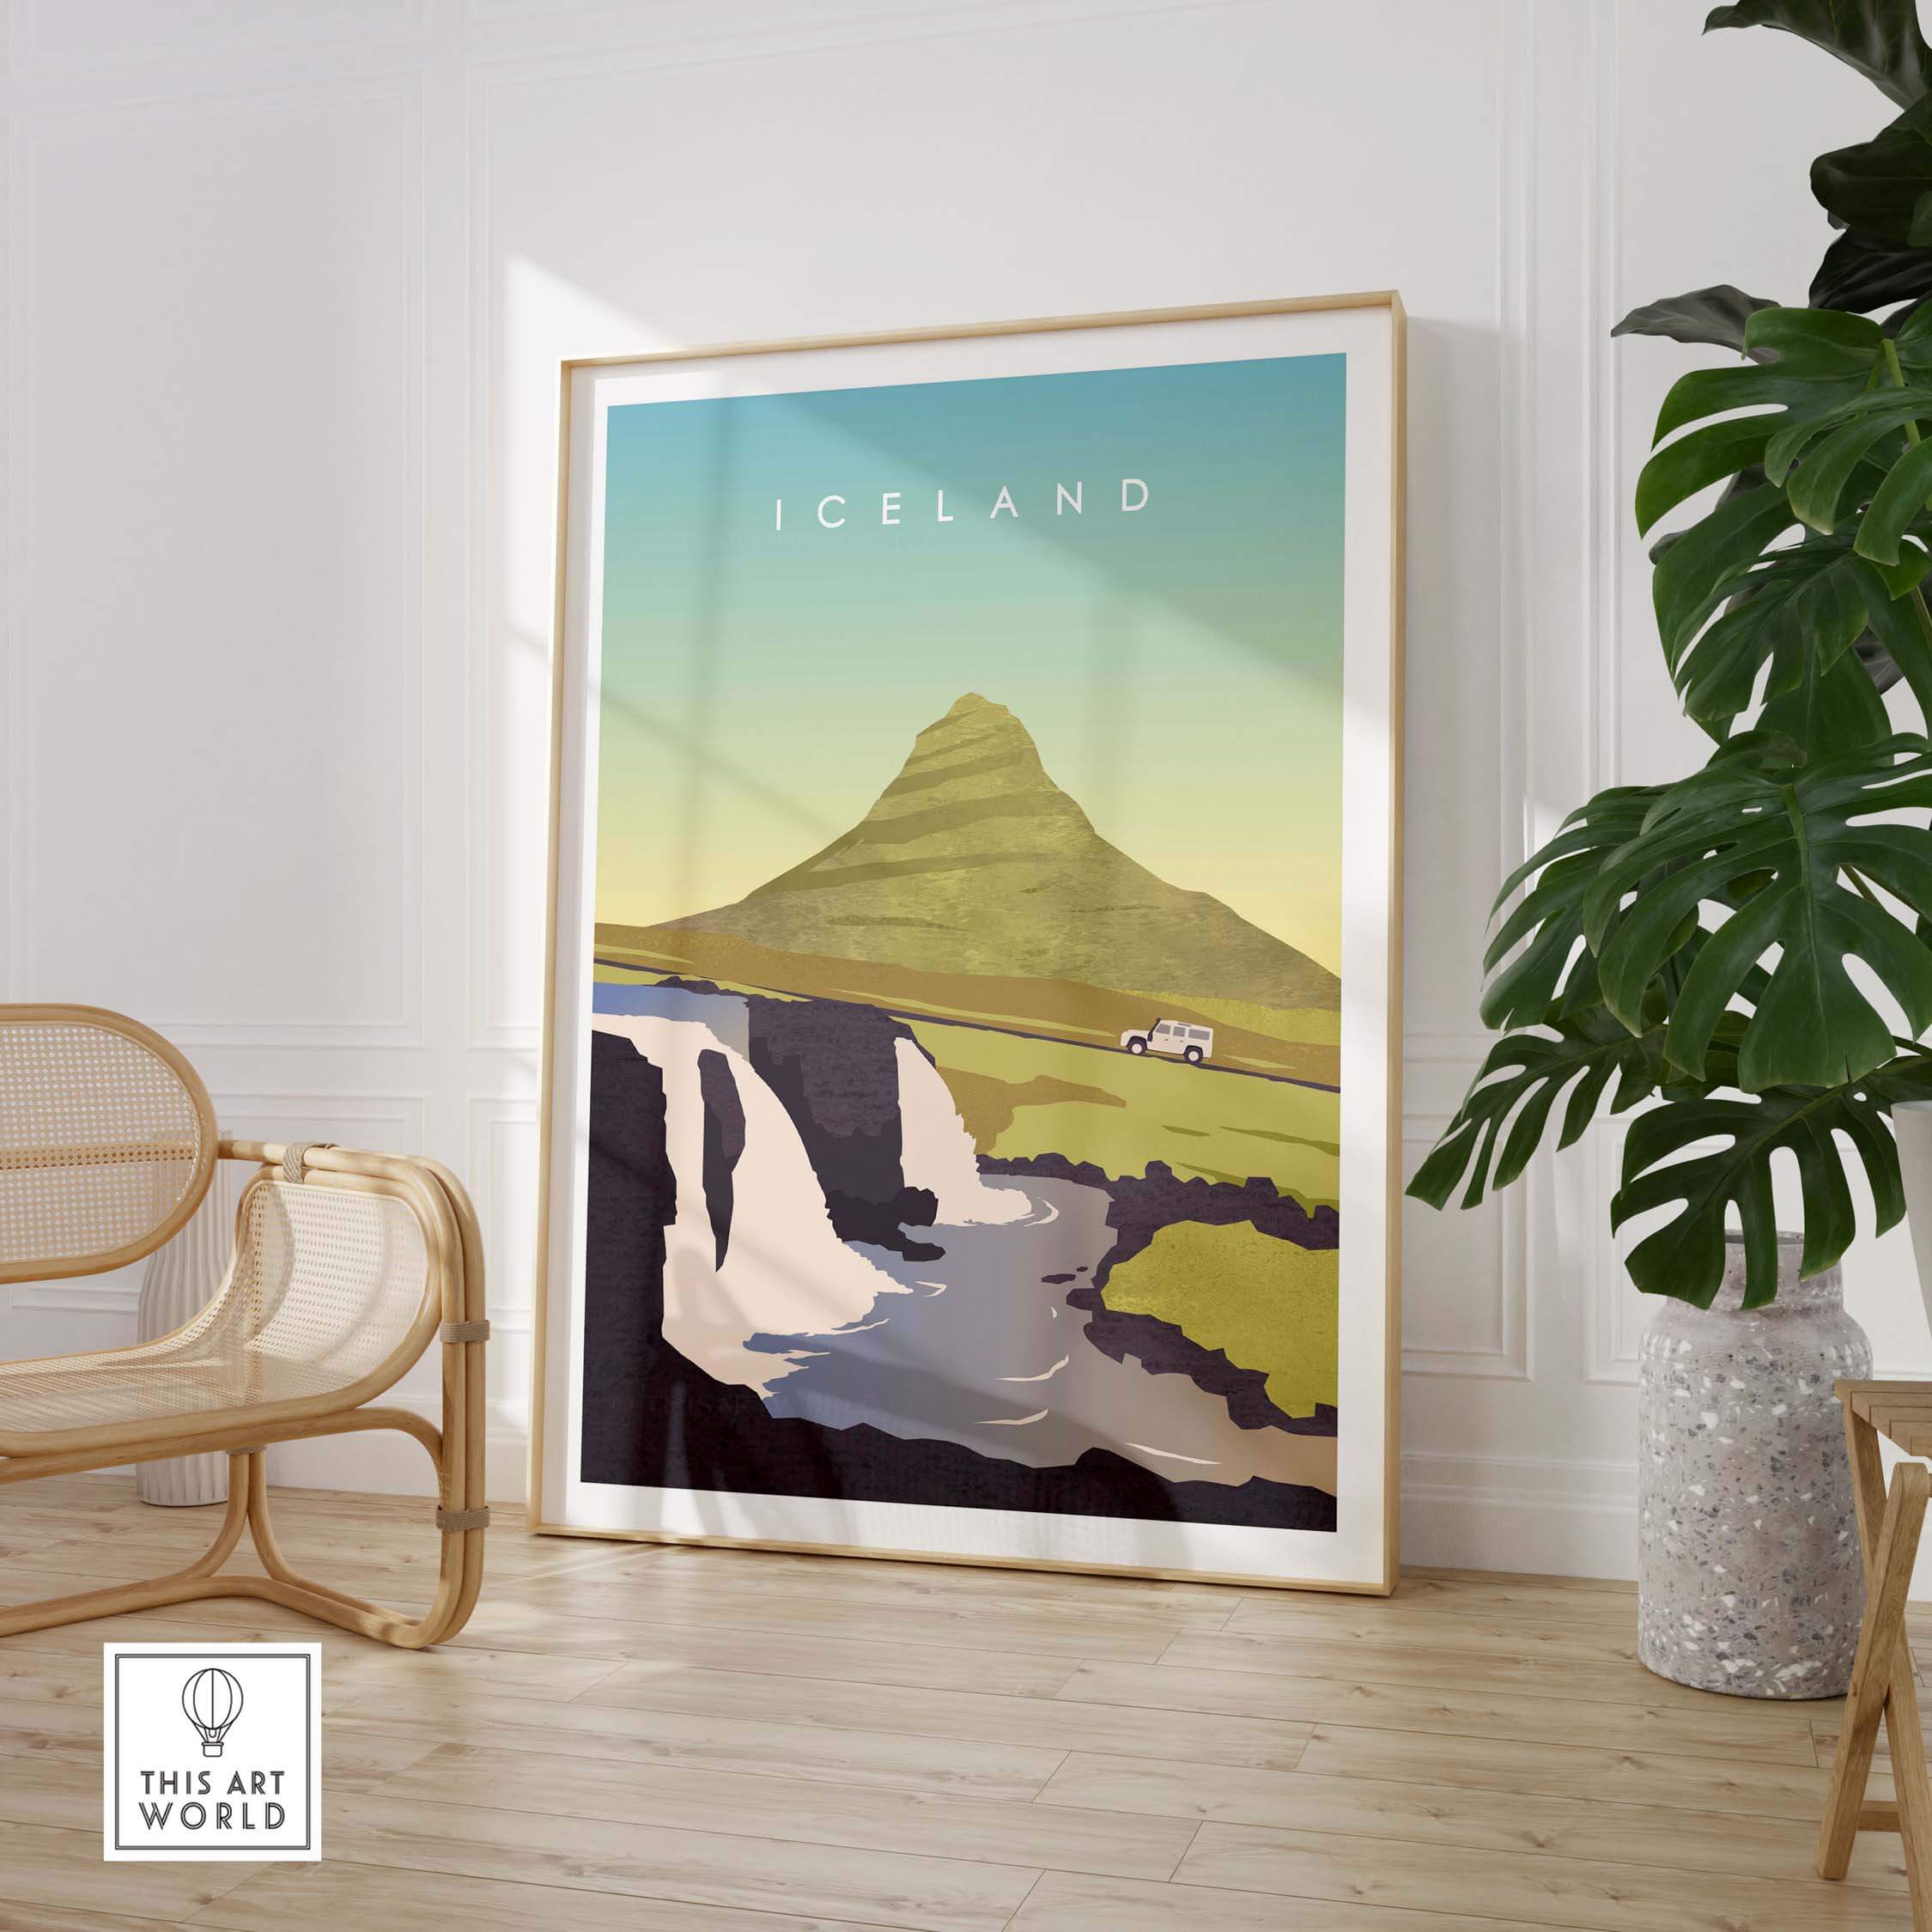 Large framed poster of Iceland in a minimalist style. The minimalist travel poster features a Land Rover climbing a hill in Iceland in light green colors.